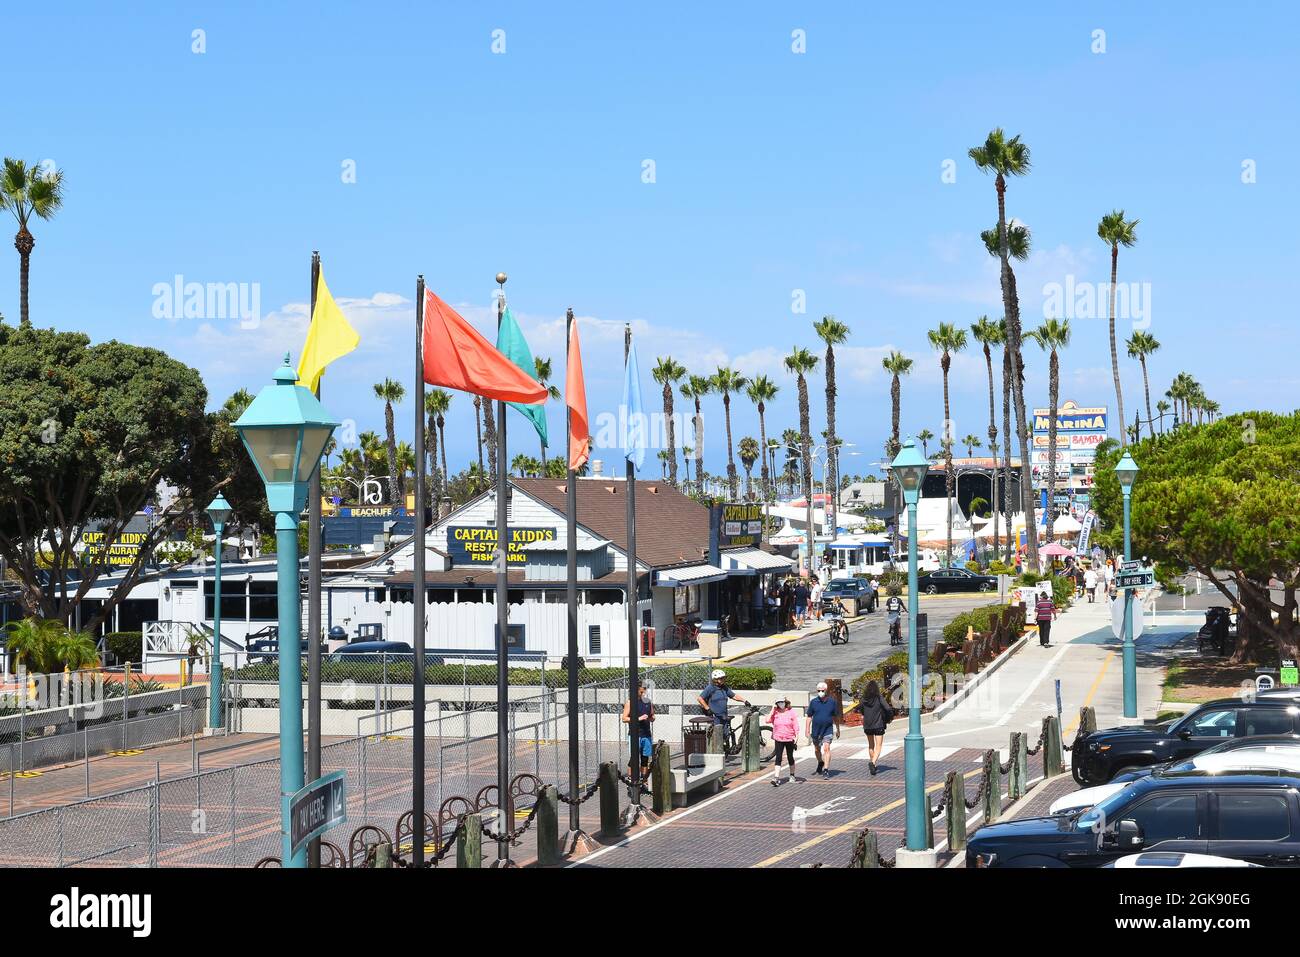 REDONDO BEACH, CALIFORNIA - 10 SEP 2021: People stroll on the boardwalk in the Marina past shops and restaurants, Stock Photo